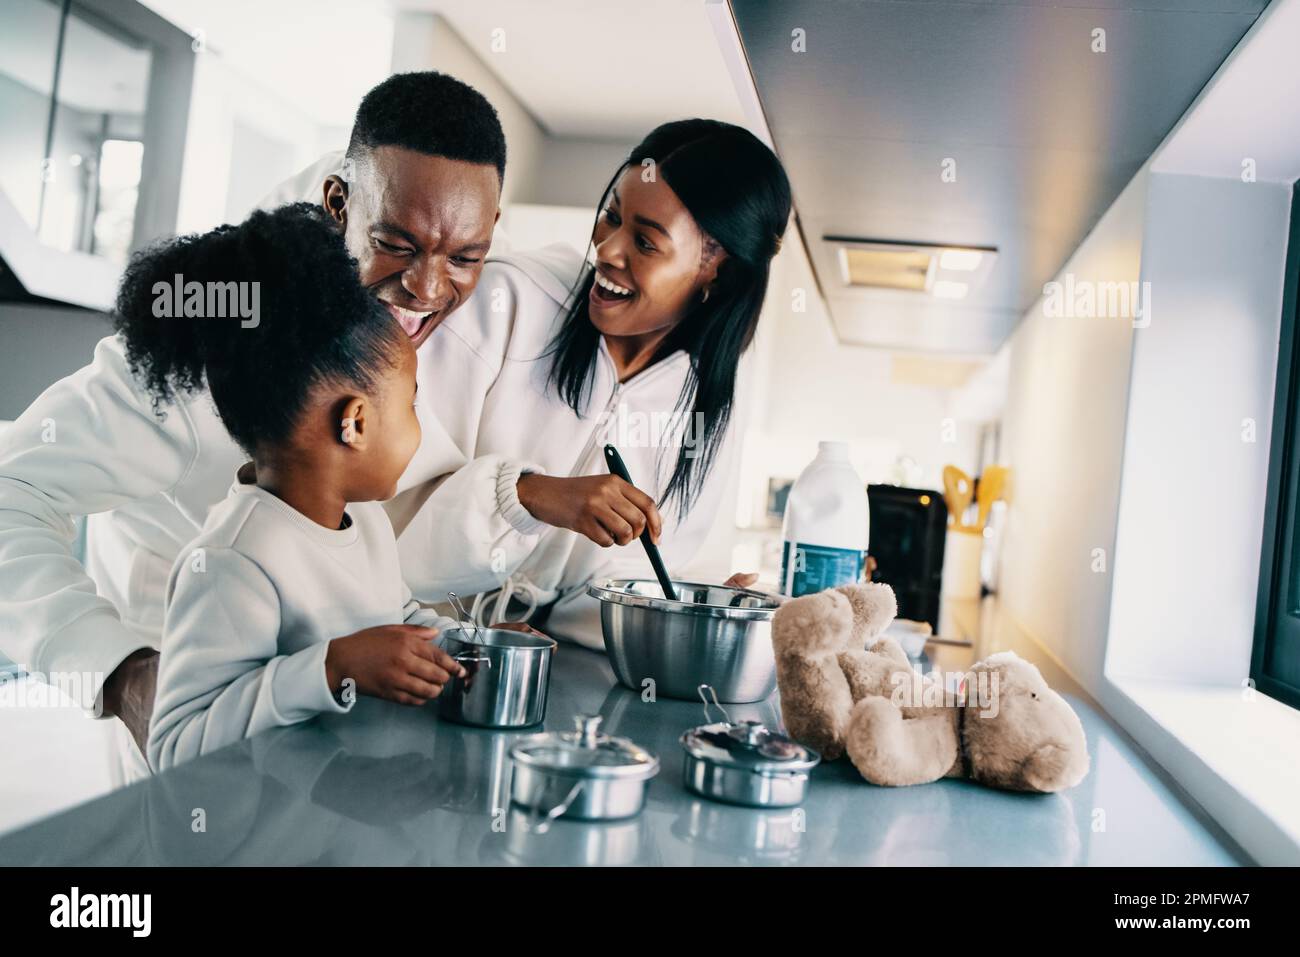 African family enjoying making breakfast together at home. Parents are talking and laughing with their daughter as they teach her how to prepare food. Stock Photo